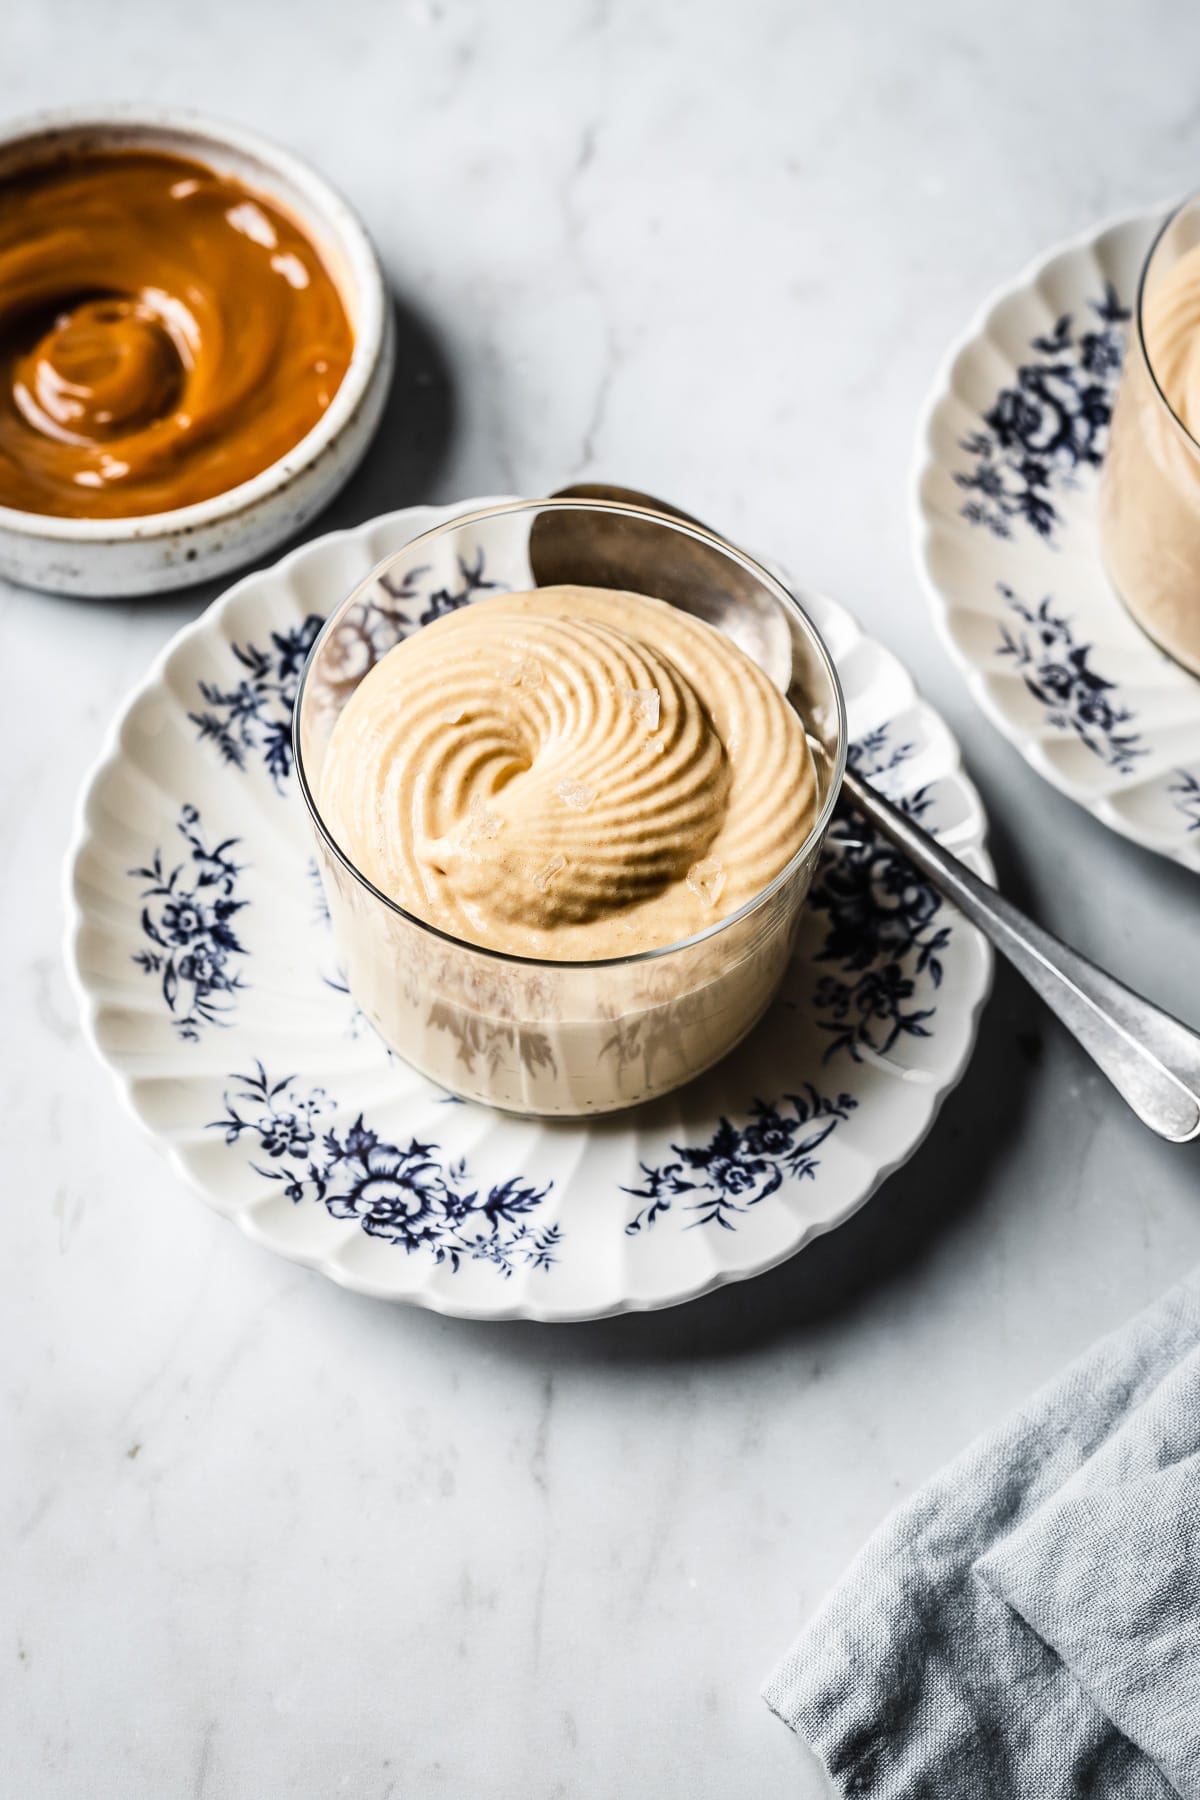 A thin glass cup holds circular swirls of piped dulce de leche mousse with flaky sea salt on top. The cup sits on a small scalloped blue and white floral plate with a spoon resting on it. The surface is made of grey marble background. At left, out of focus, is a small bowl of dulce de leche. Another glass of mousse peeks into the frame at right, along with a light blue linen napkin.